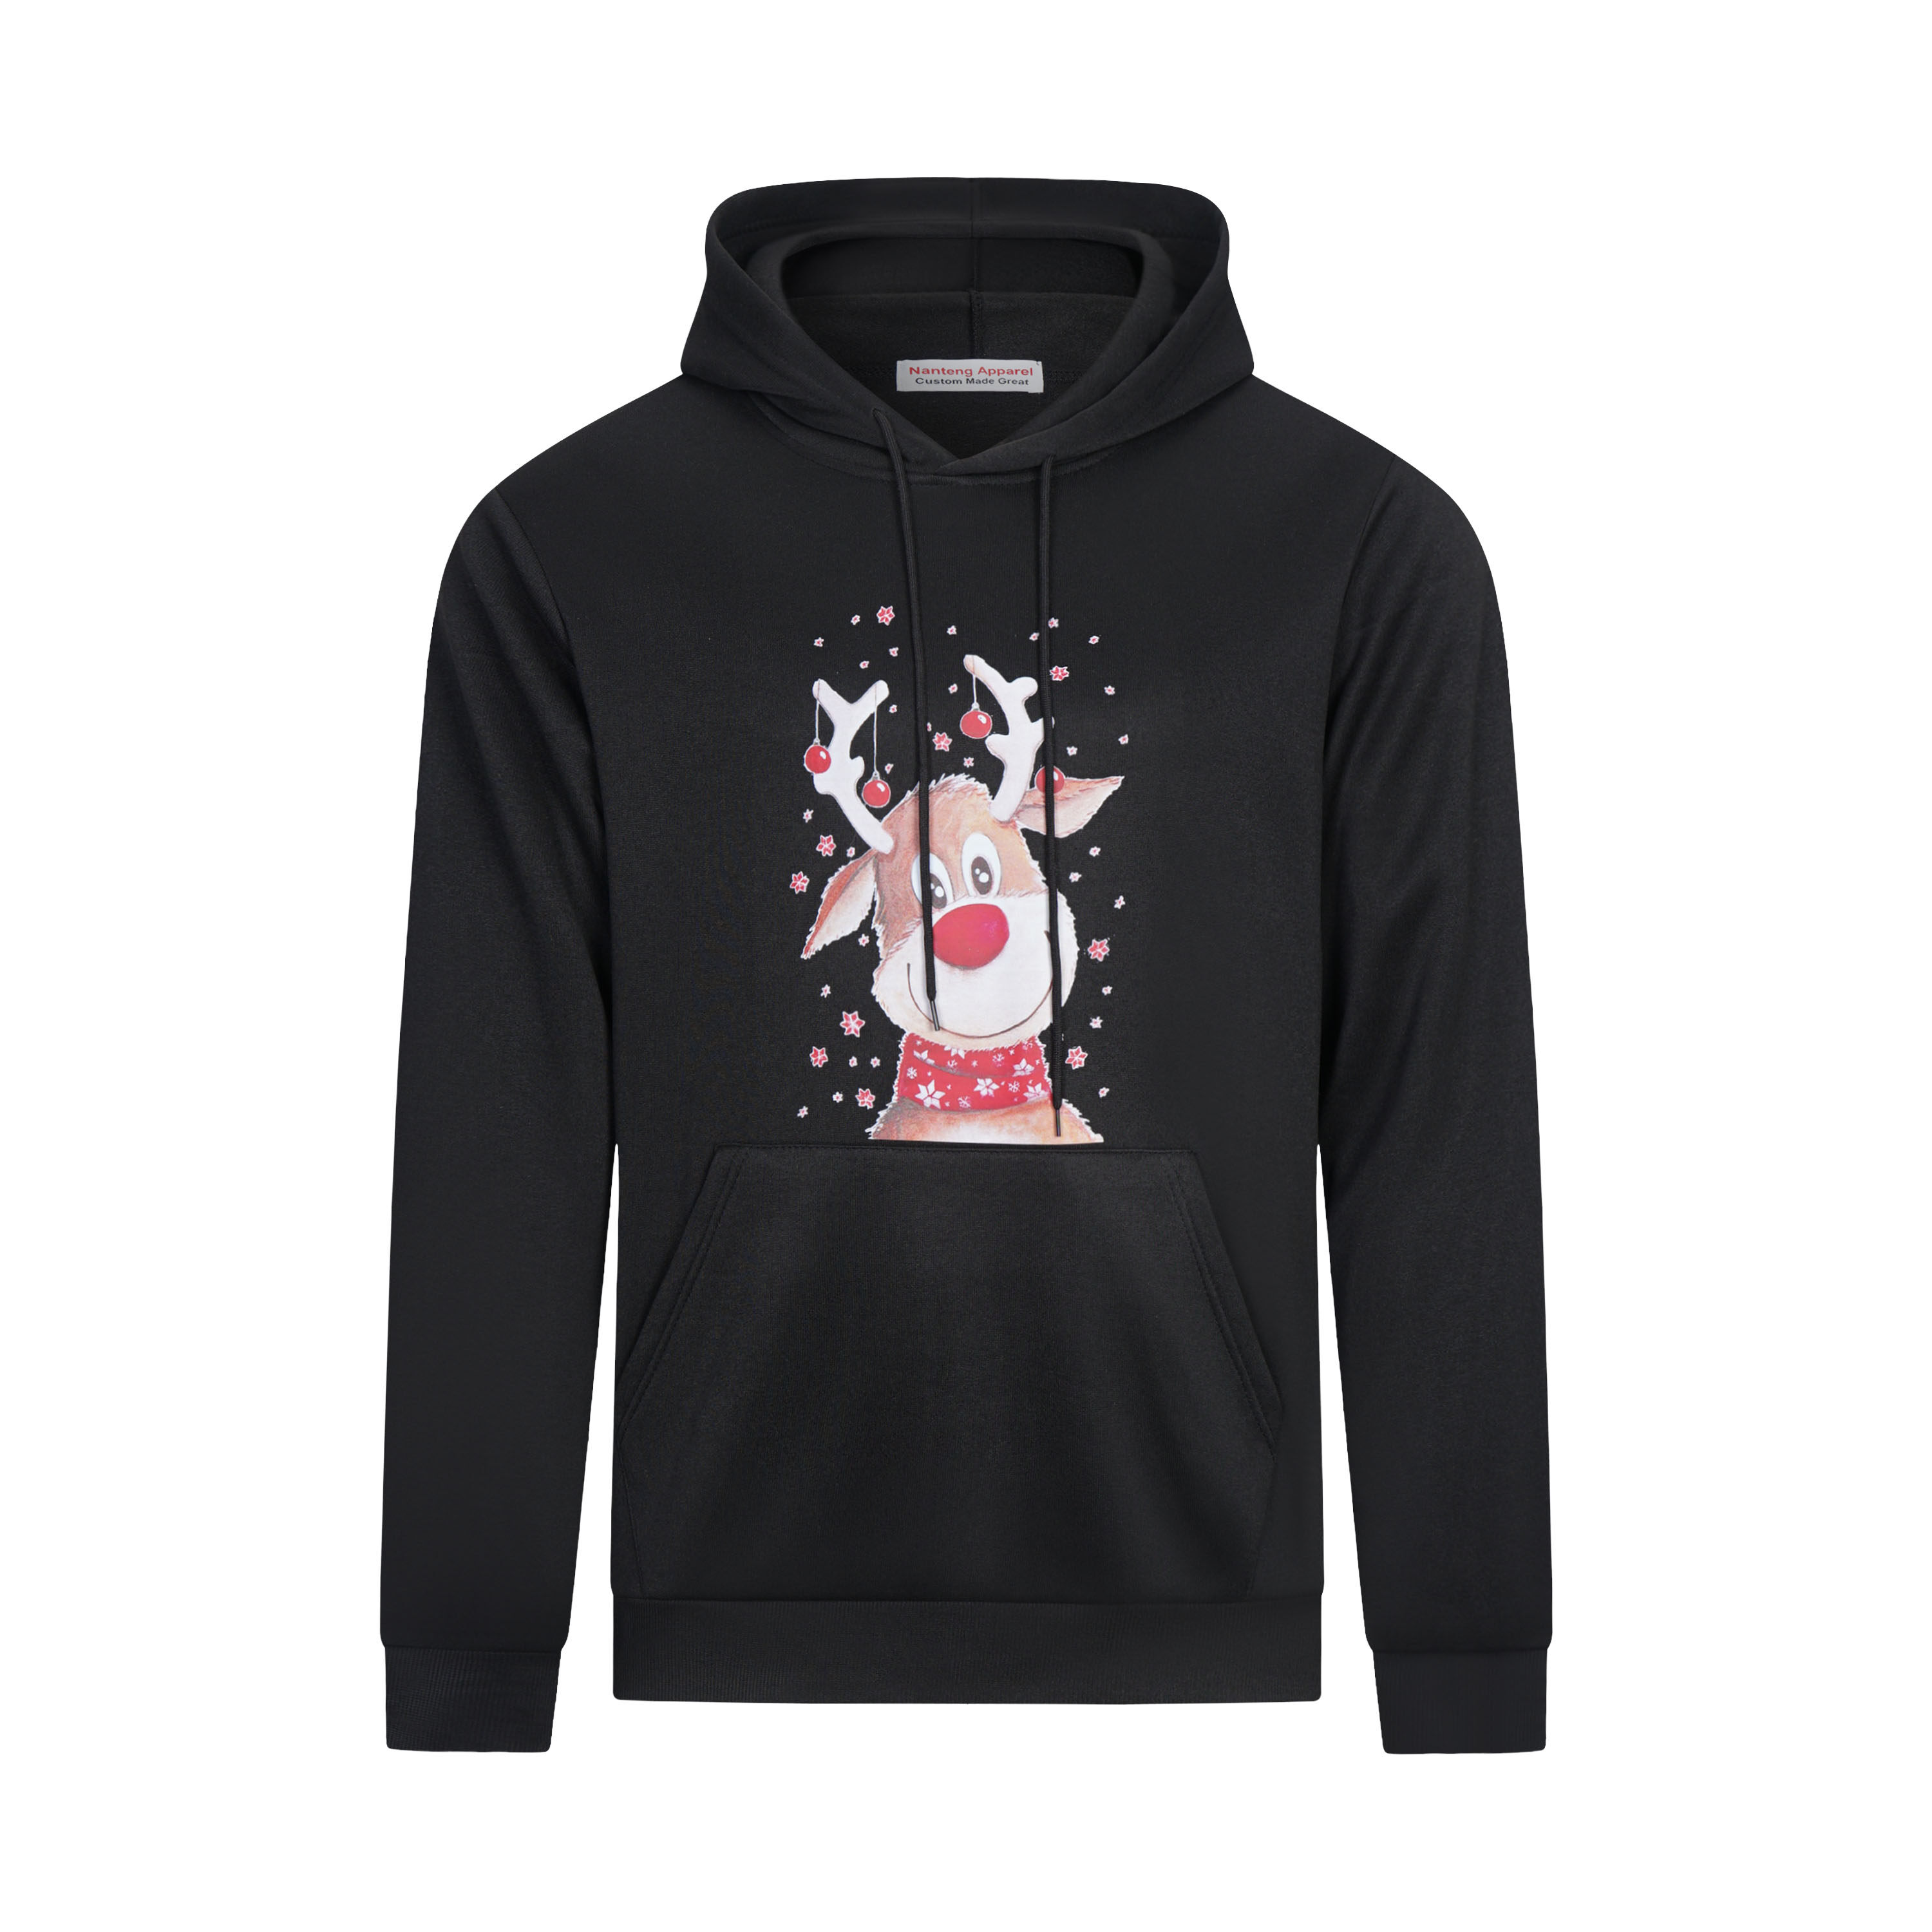 Custom Autumn Ugly Xmas Hoodie With Stitch Pocket Reindeer Expanded Clear Cotton Men Christmas Sweatshirt